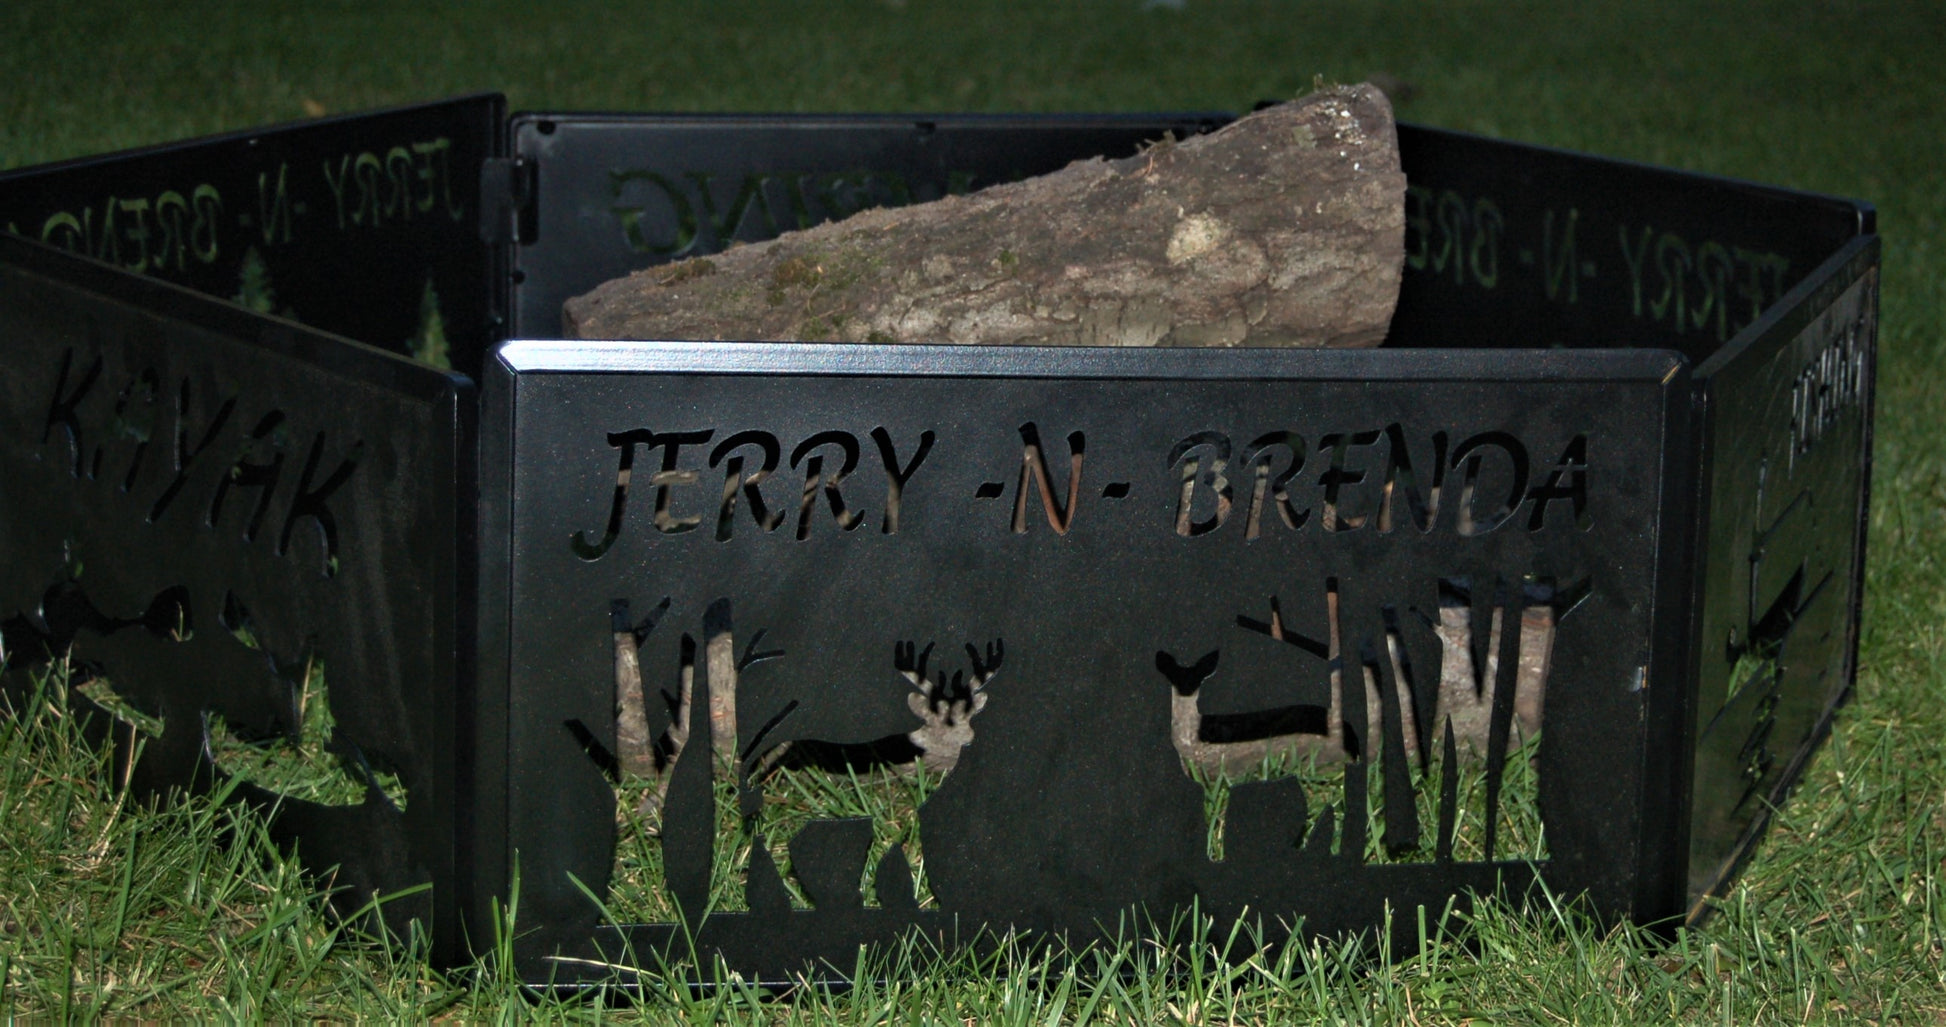 black metal Deer style inspiring assembled with logs inside of it. SKU number FRD priced at $350.00. 36" wide by 10" high. 